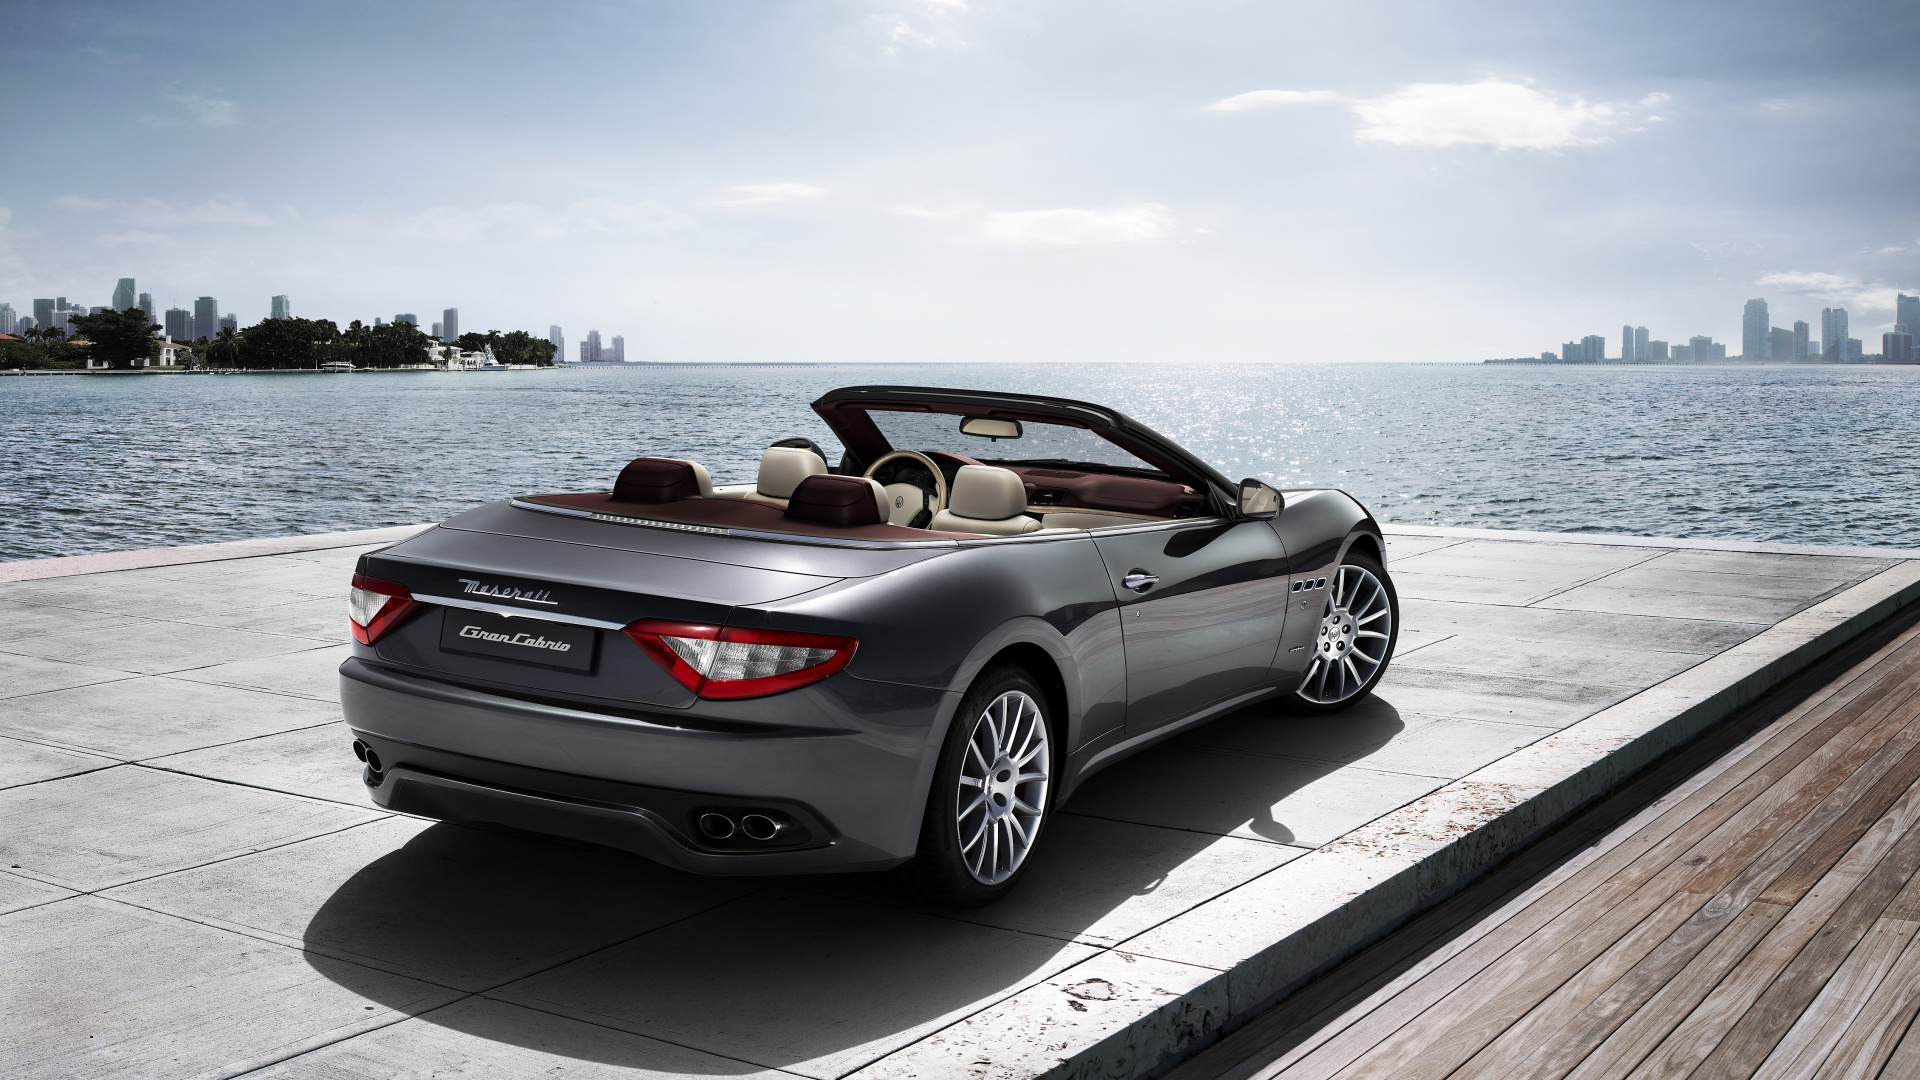 Silver Mercedes Benz Convertible Coupe Parked on Dock During Daytime. Wallpaper in 1920x1080 Resolution